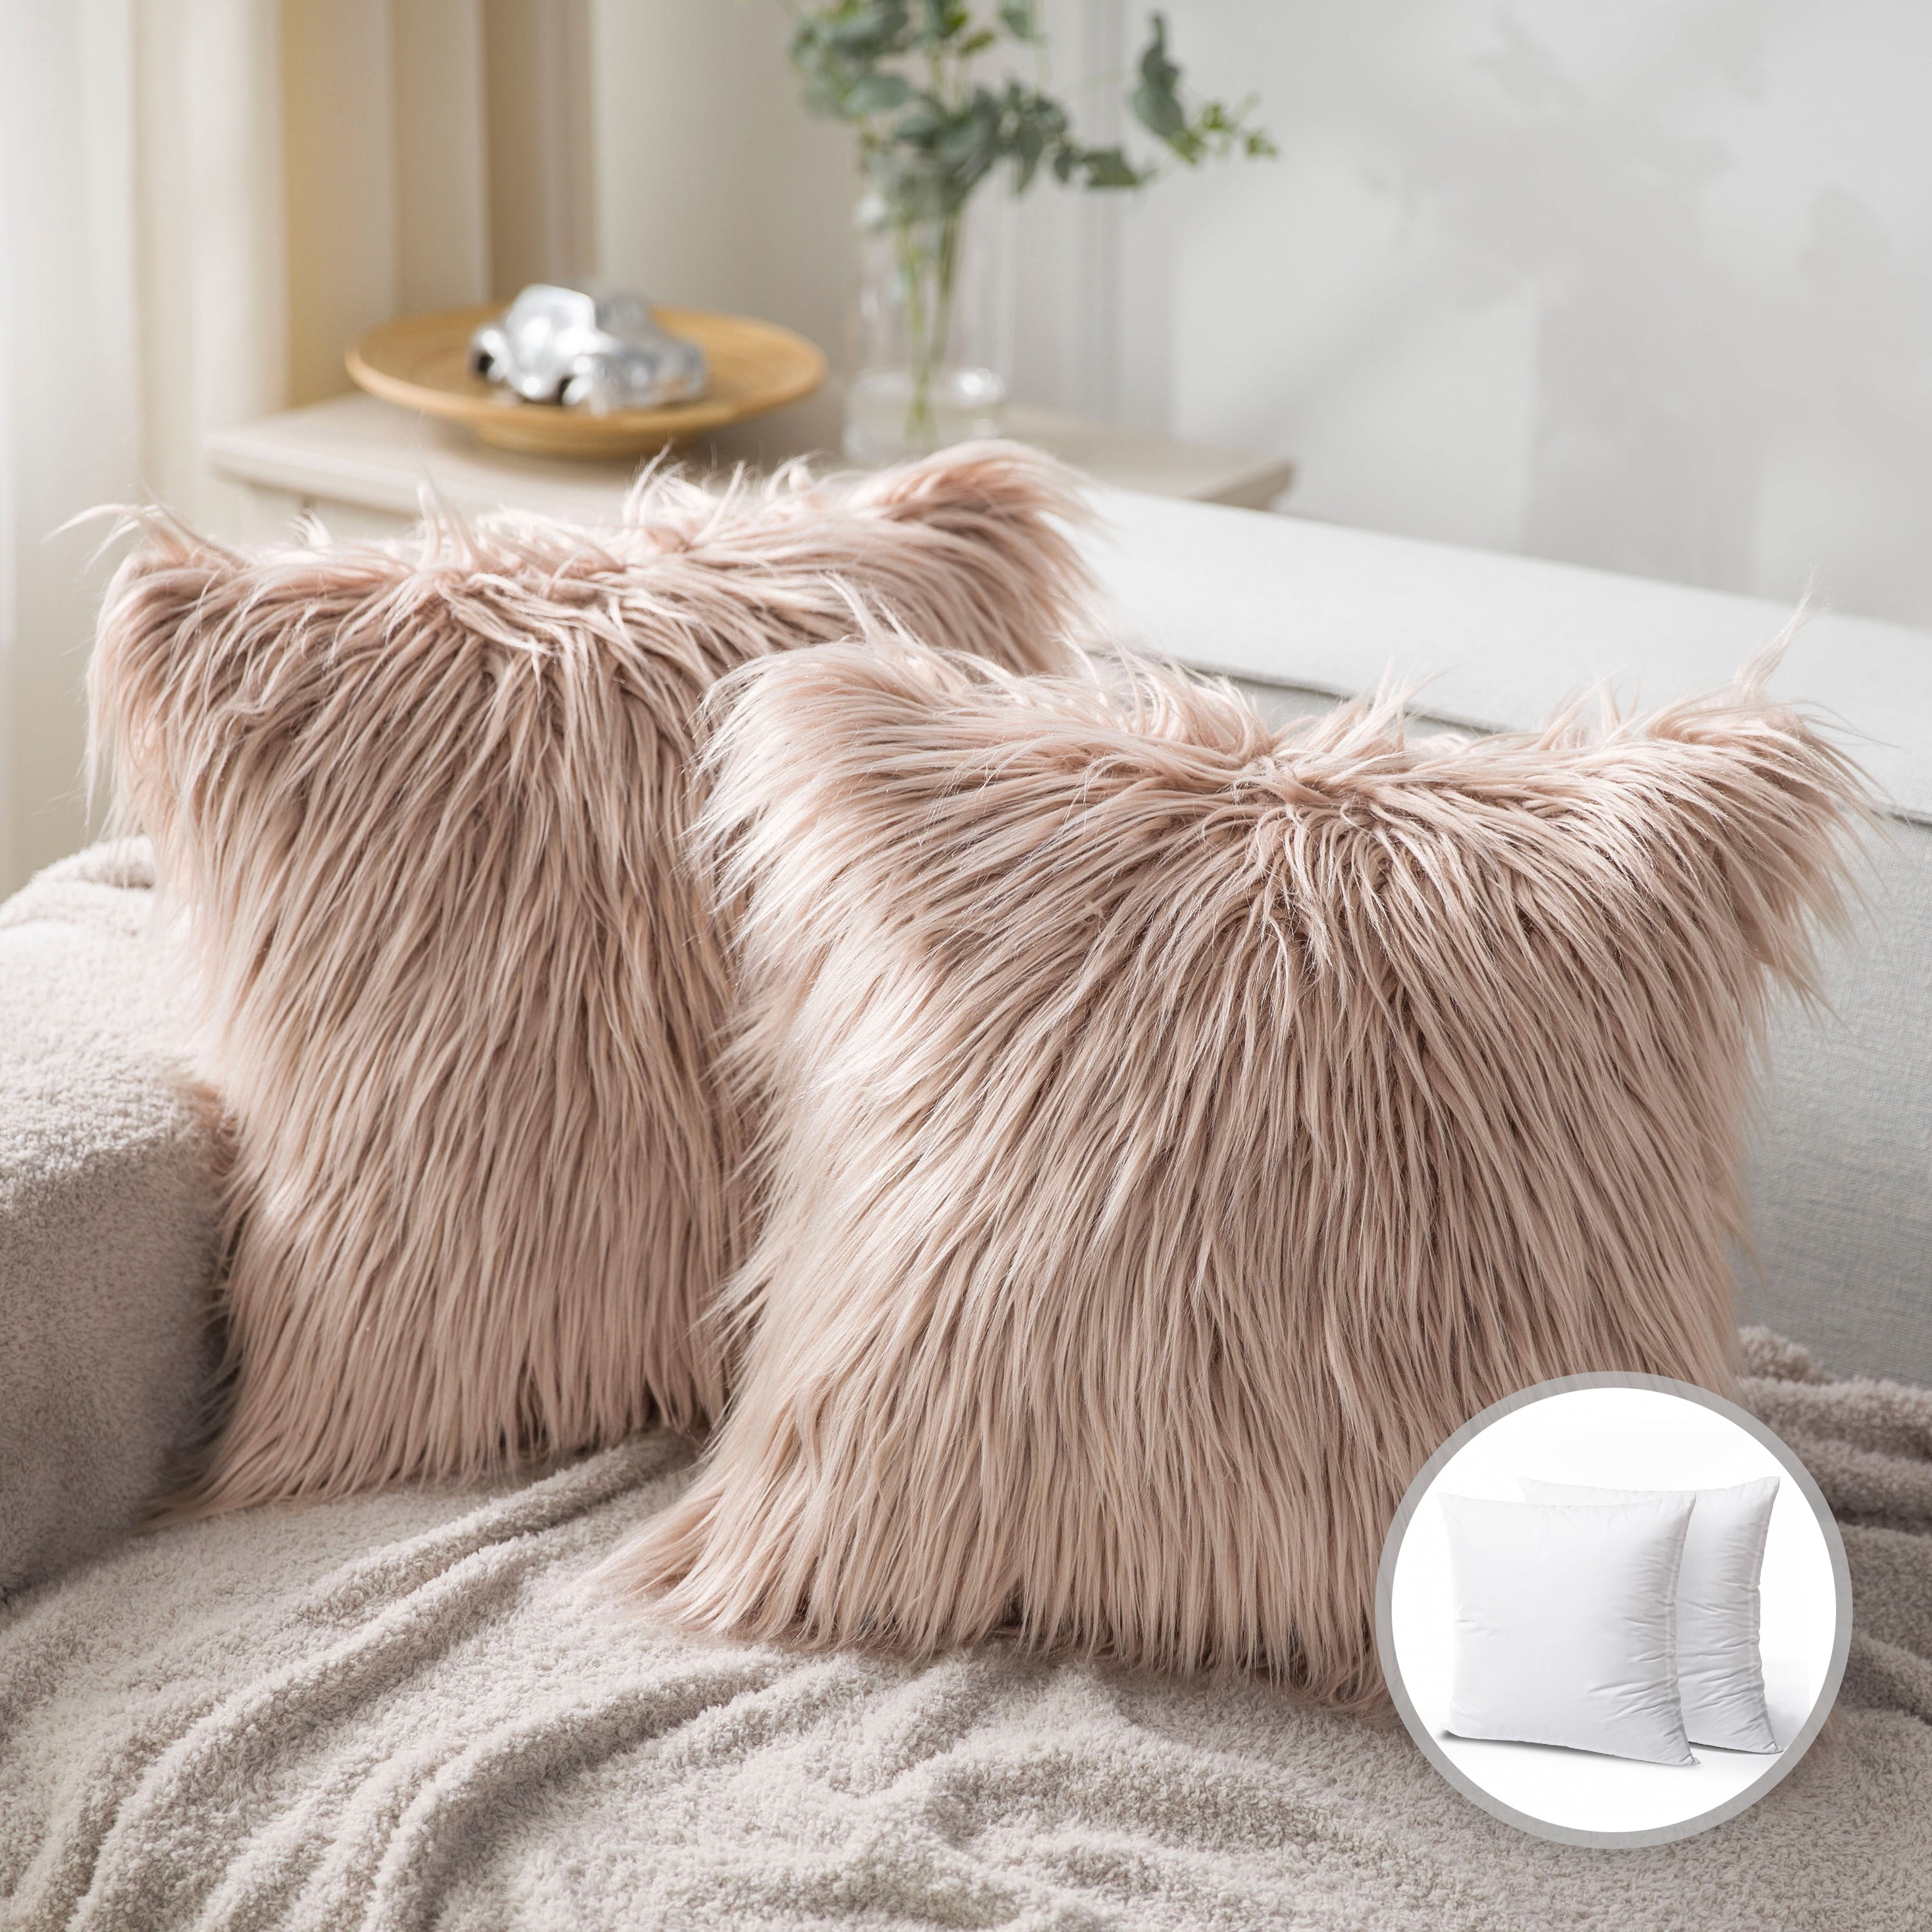 Phantoscope Luxury Mongolian Fluffy Faux Fur Series Square Decorative Throw Pillow Cusion for Couch, 12 inch x 20 inch, Pink, 2 Pack, Size: 12 x 20